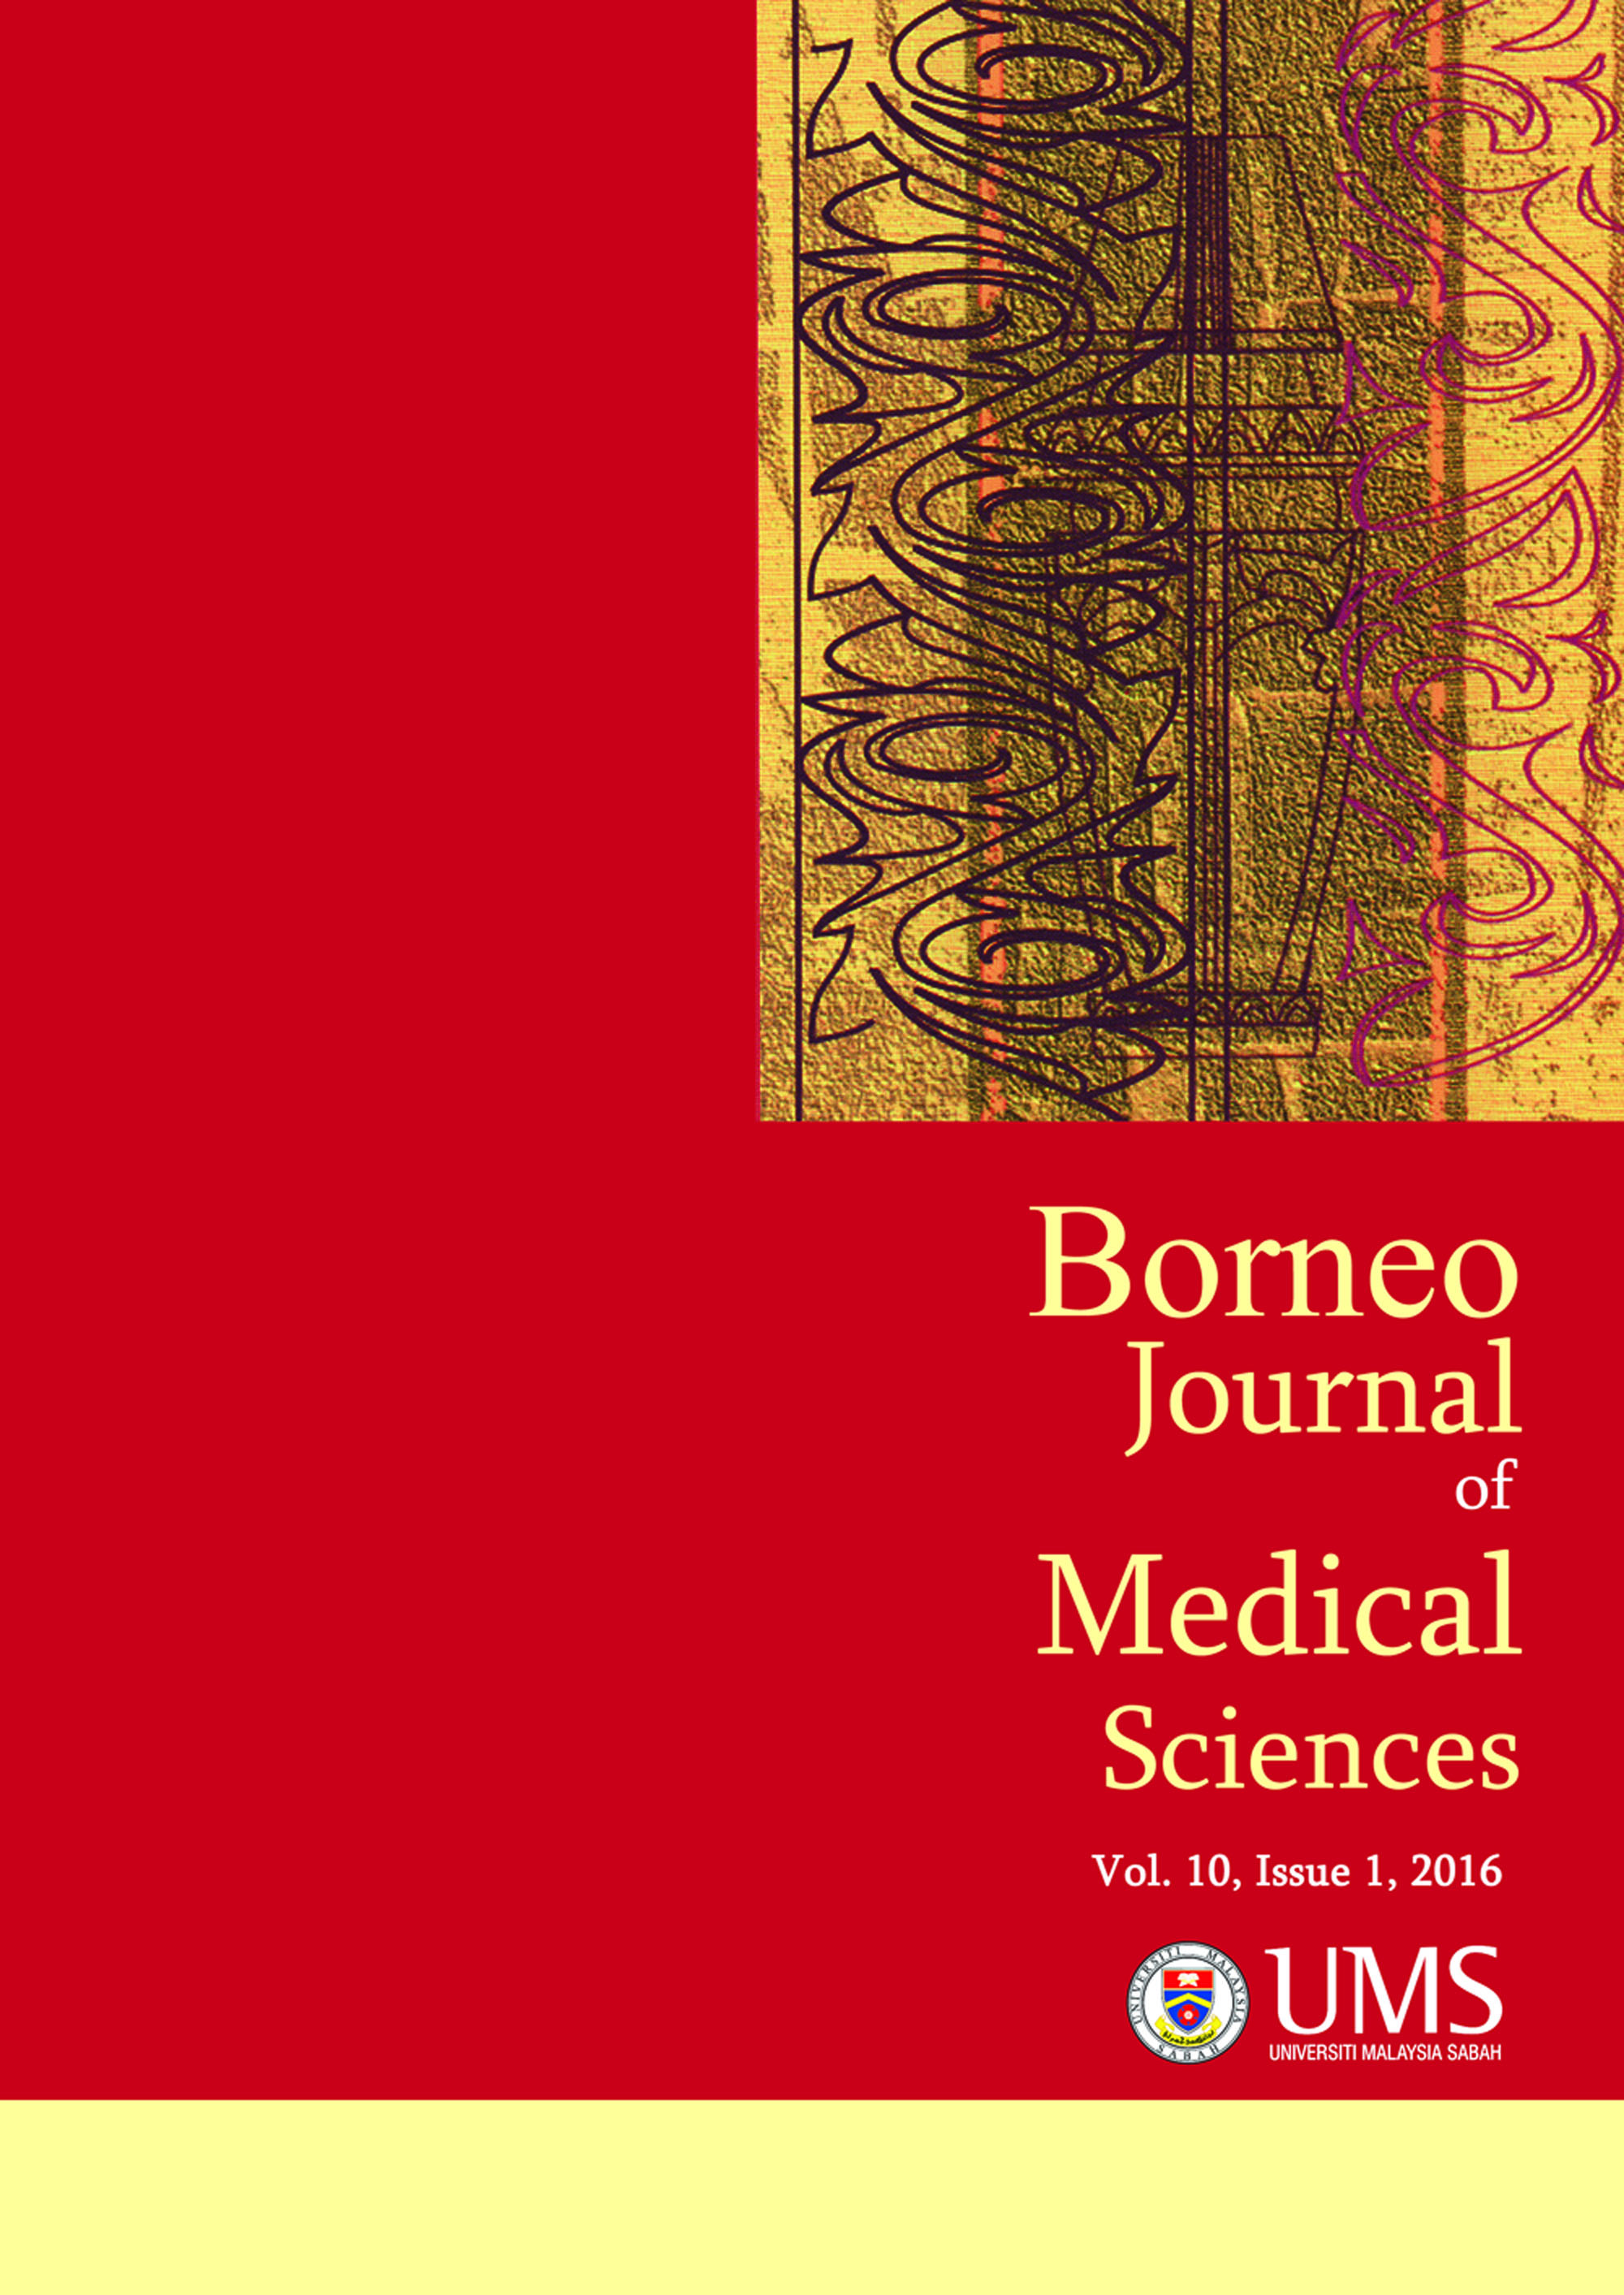 					View Vol. 10 No. 1 (2016): BORNEO JOURNAL OF MEDICAL SCIENCES VOLUME 10, ISSUE 1, 2016
				